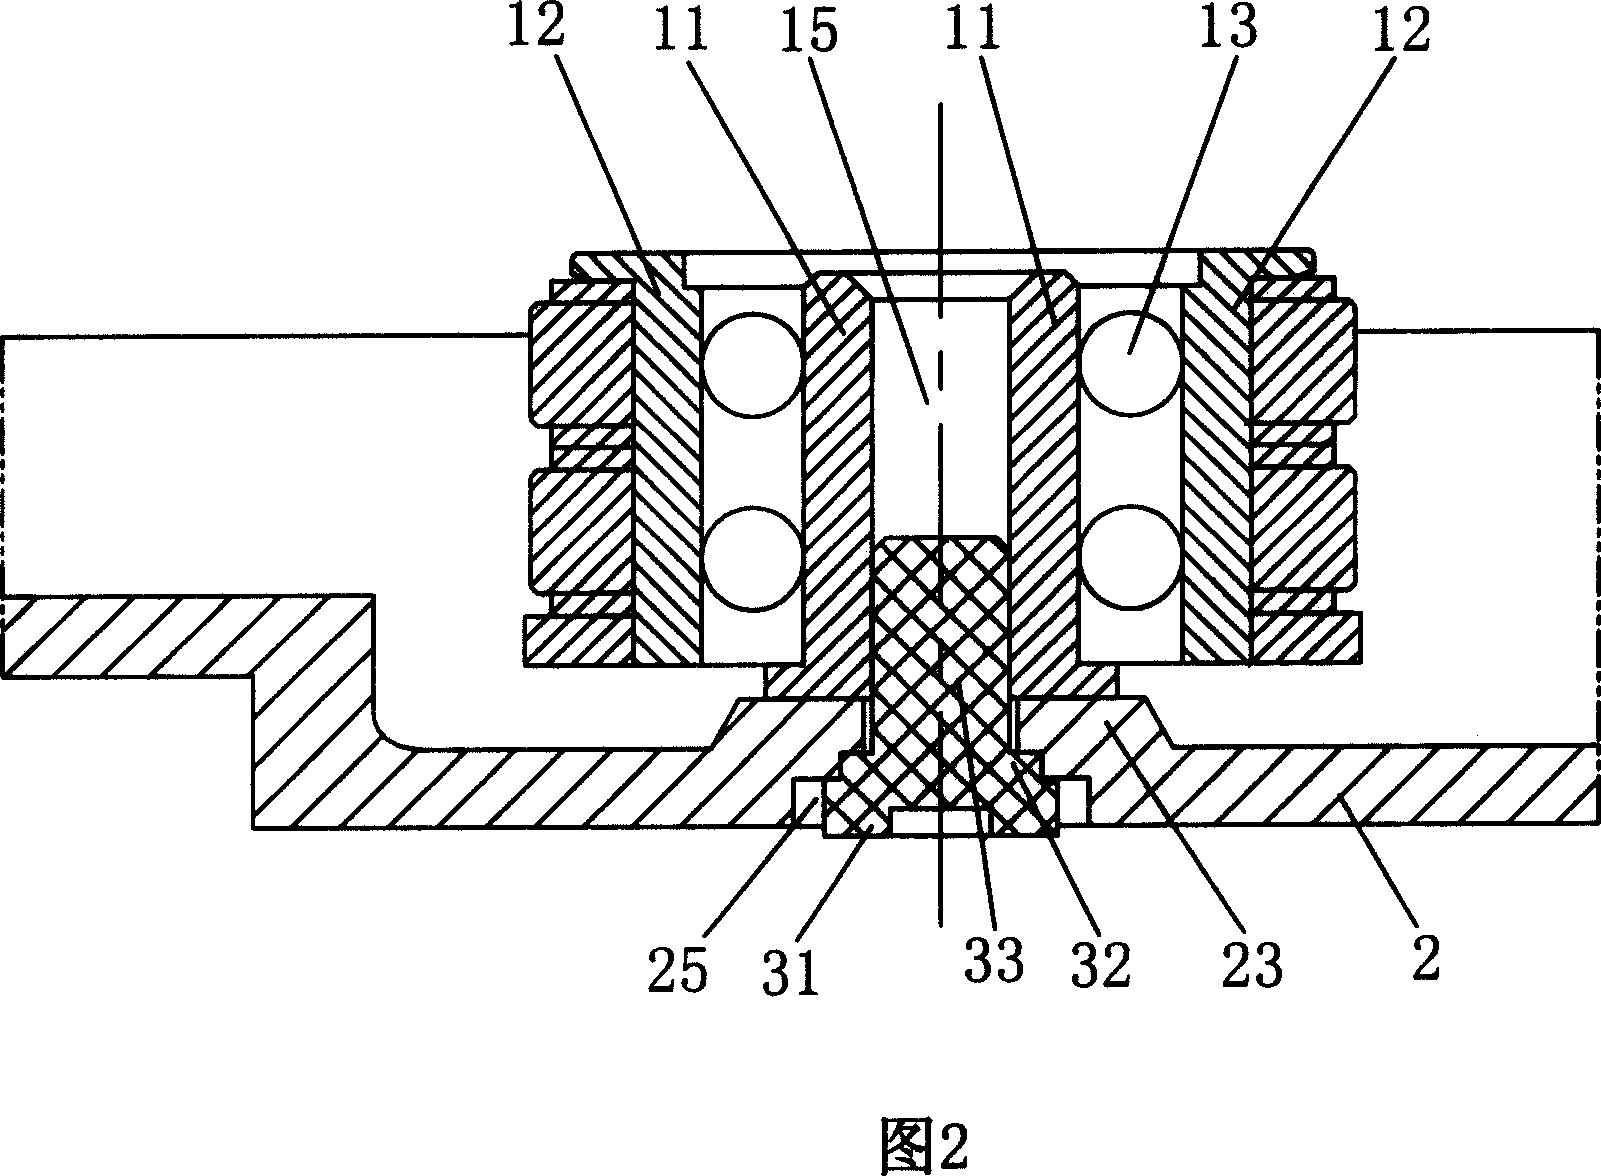 Magnetic head assembly positioning structure